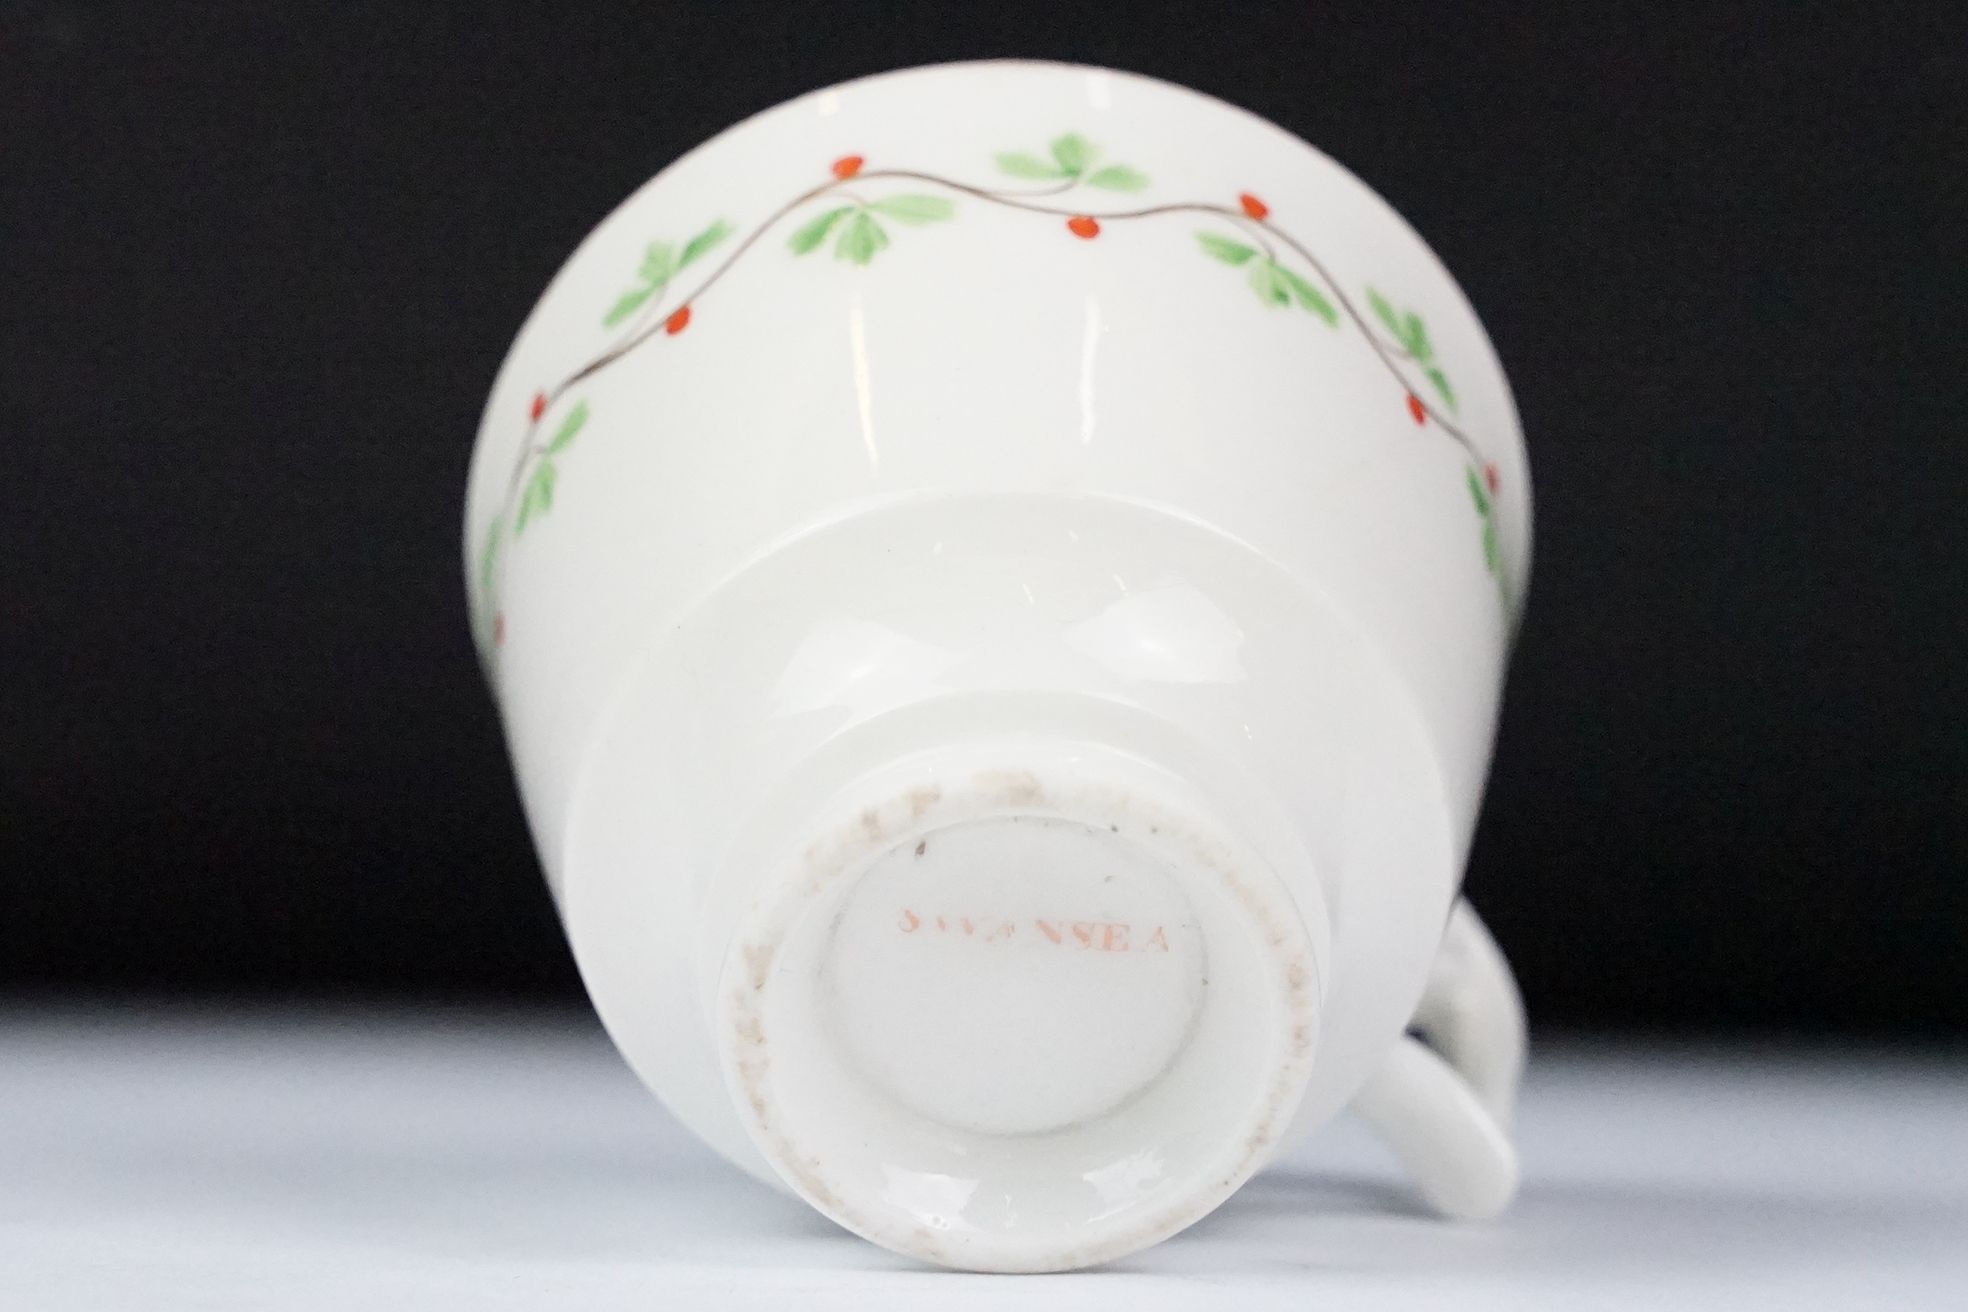 Swansea pottery cup and saucer, hand painted with a floral garland, the saucer, 13.5cm diameter - Image 5 of 7